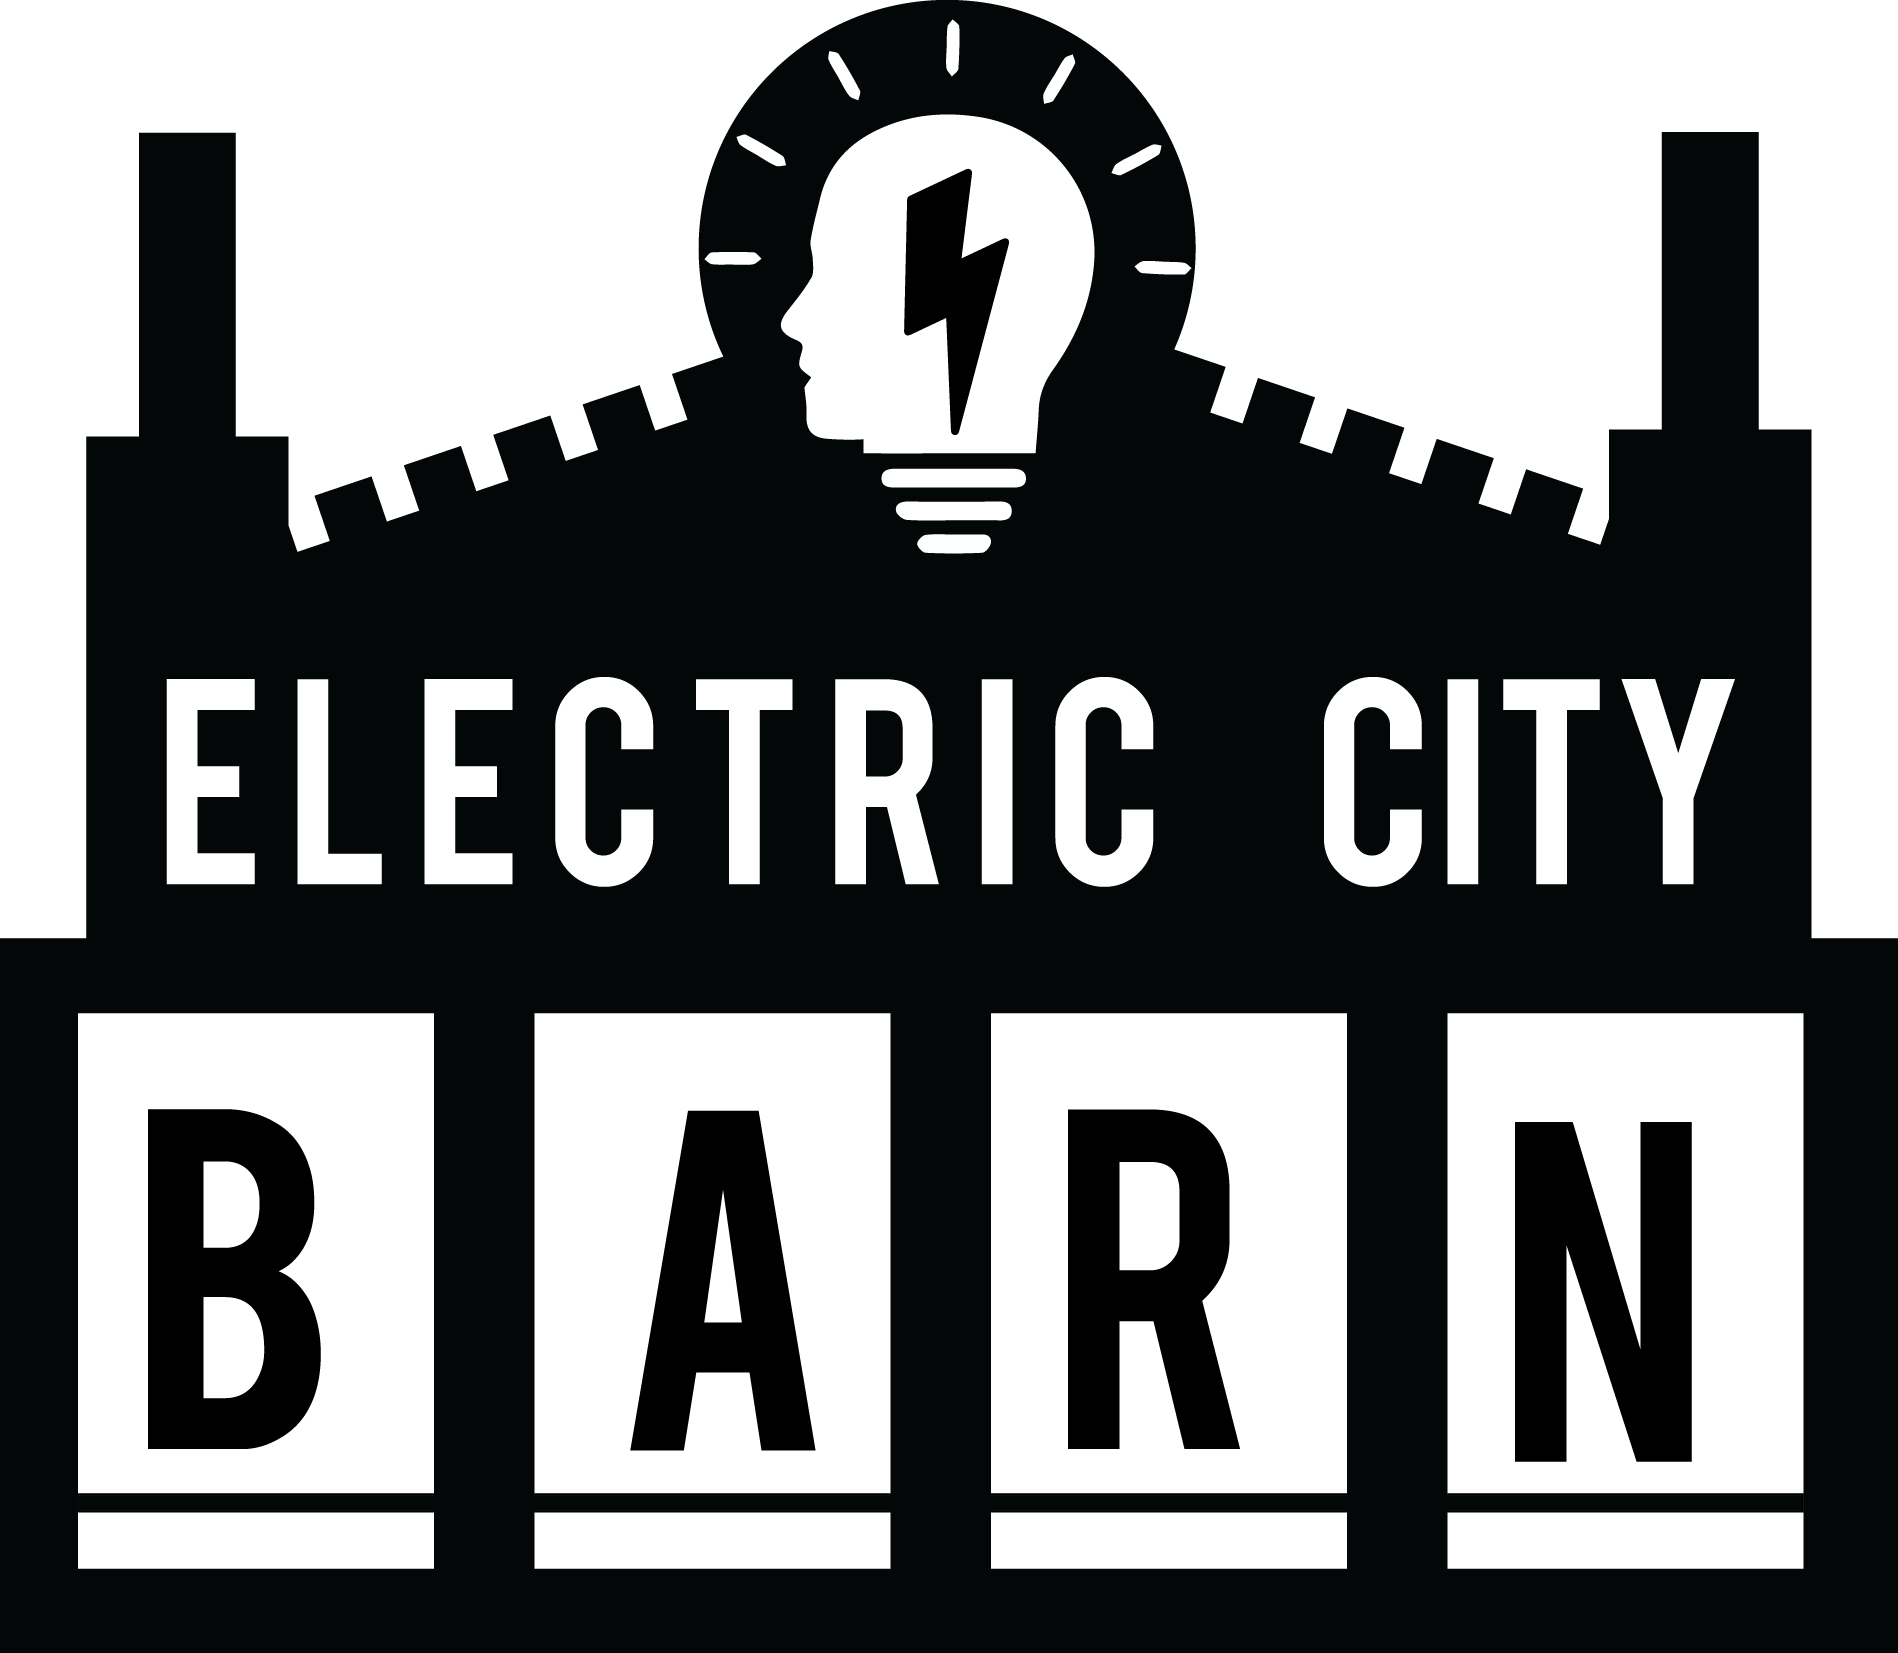 electric city barn.png